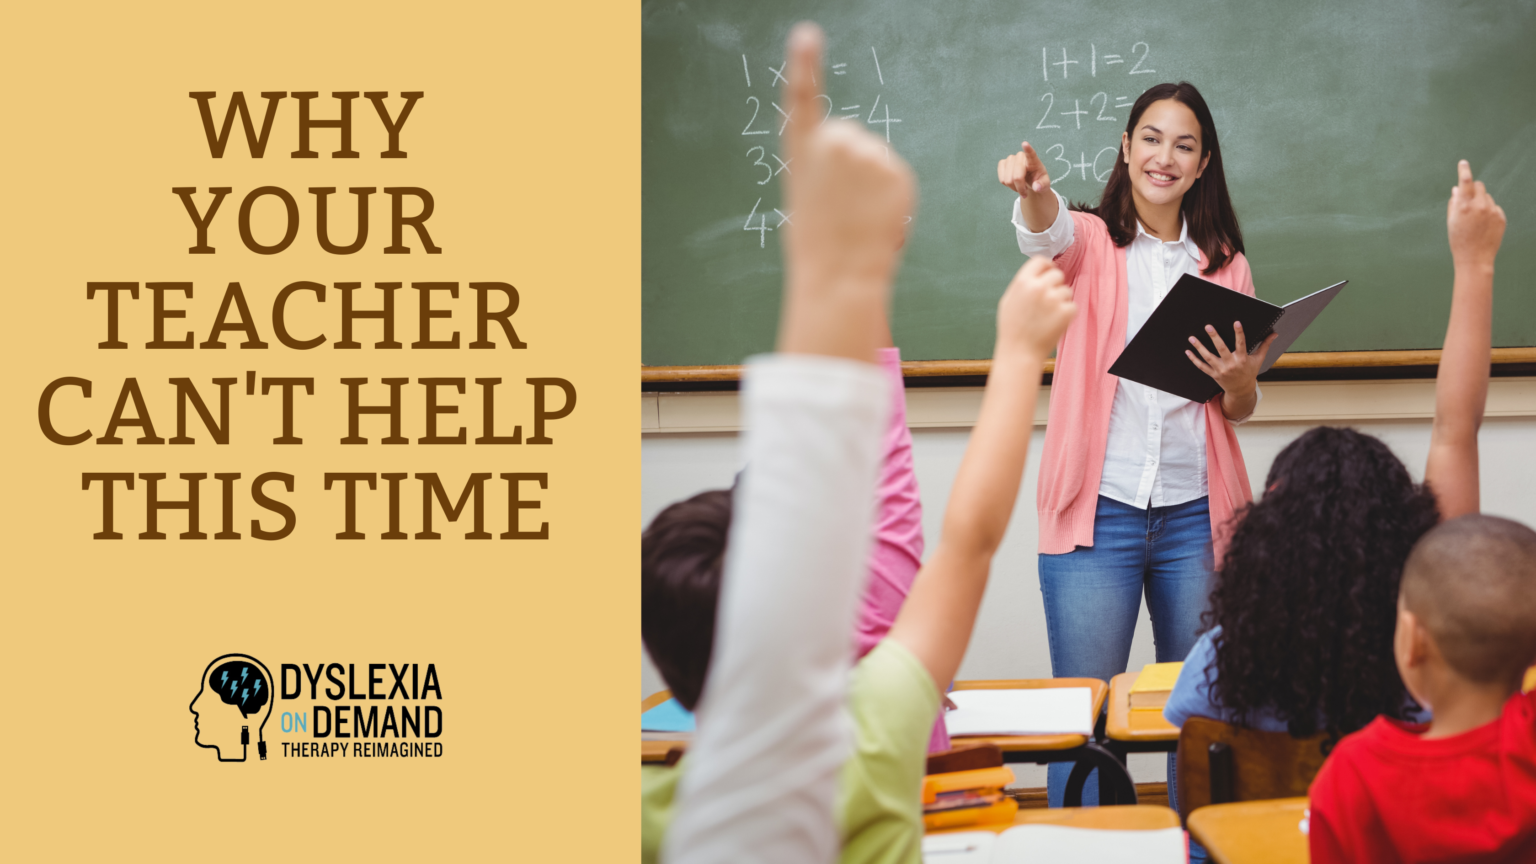 Why Your Teacher Can’t Help This Time